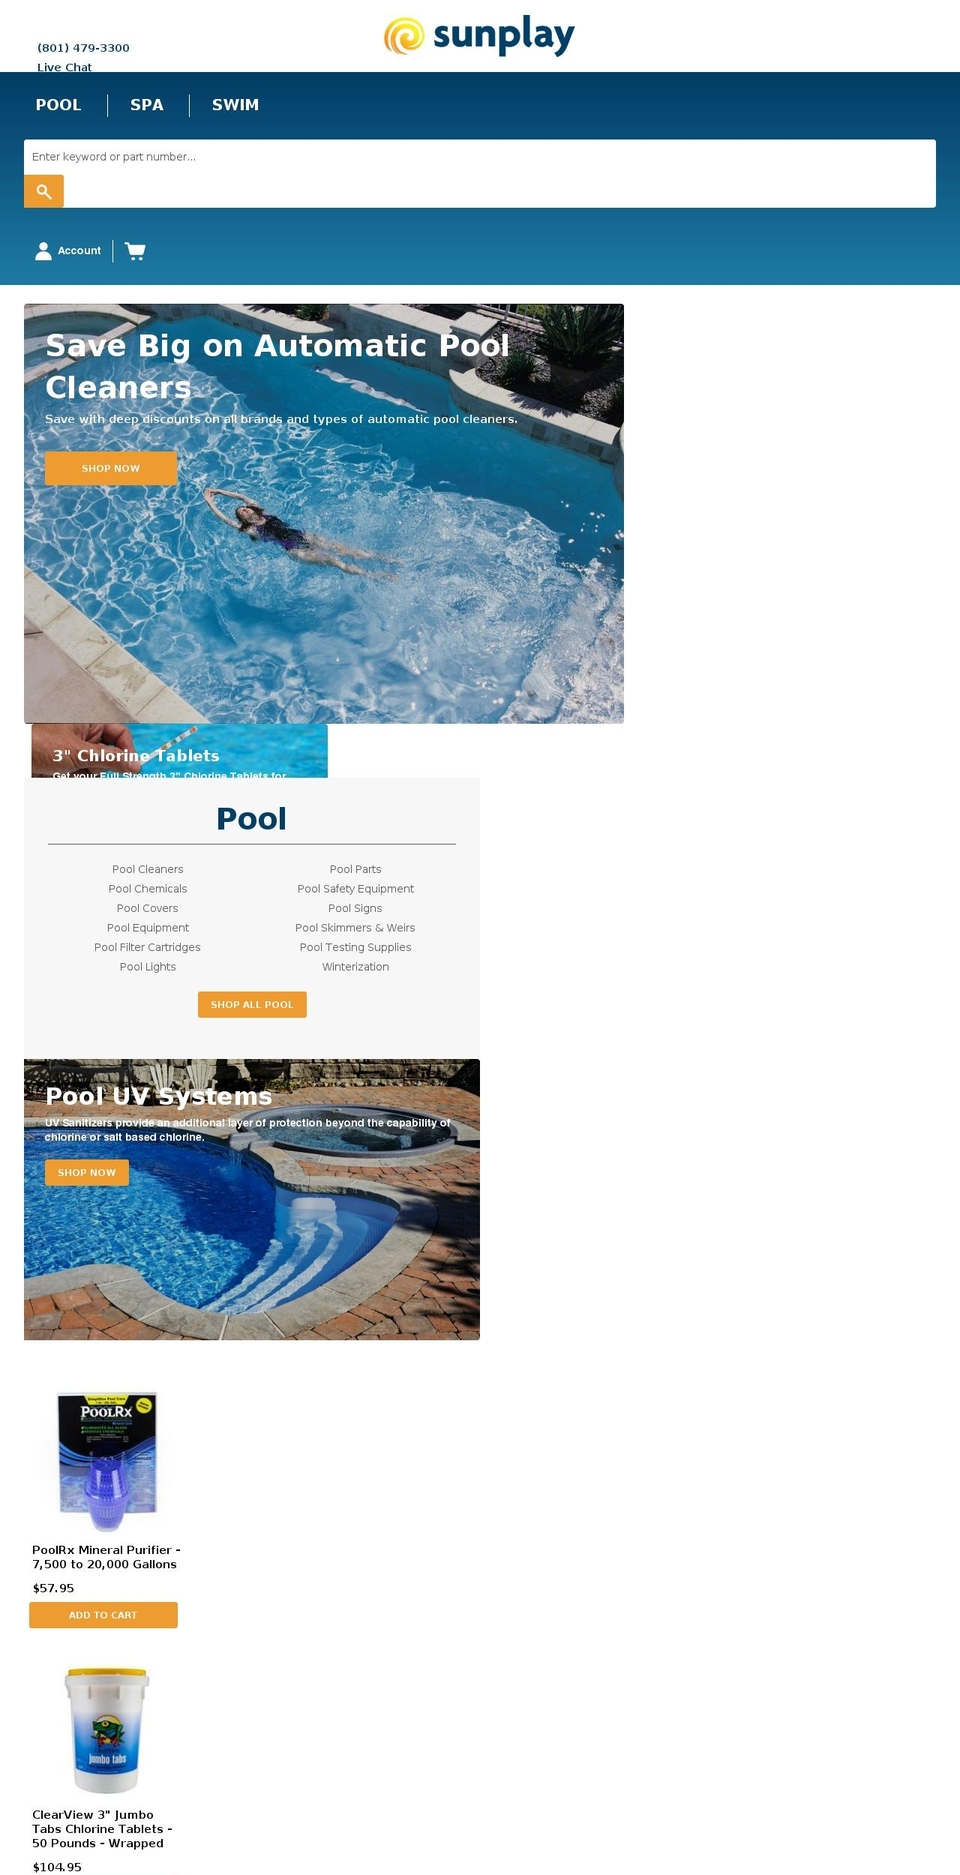 Sunplay v1.0 [Speck - Collection] Shopify theme site example sunplayspaconstruction.com